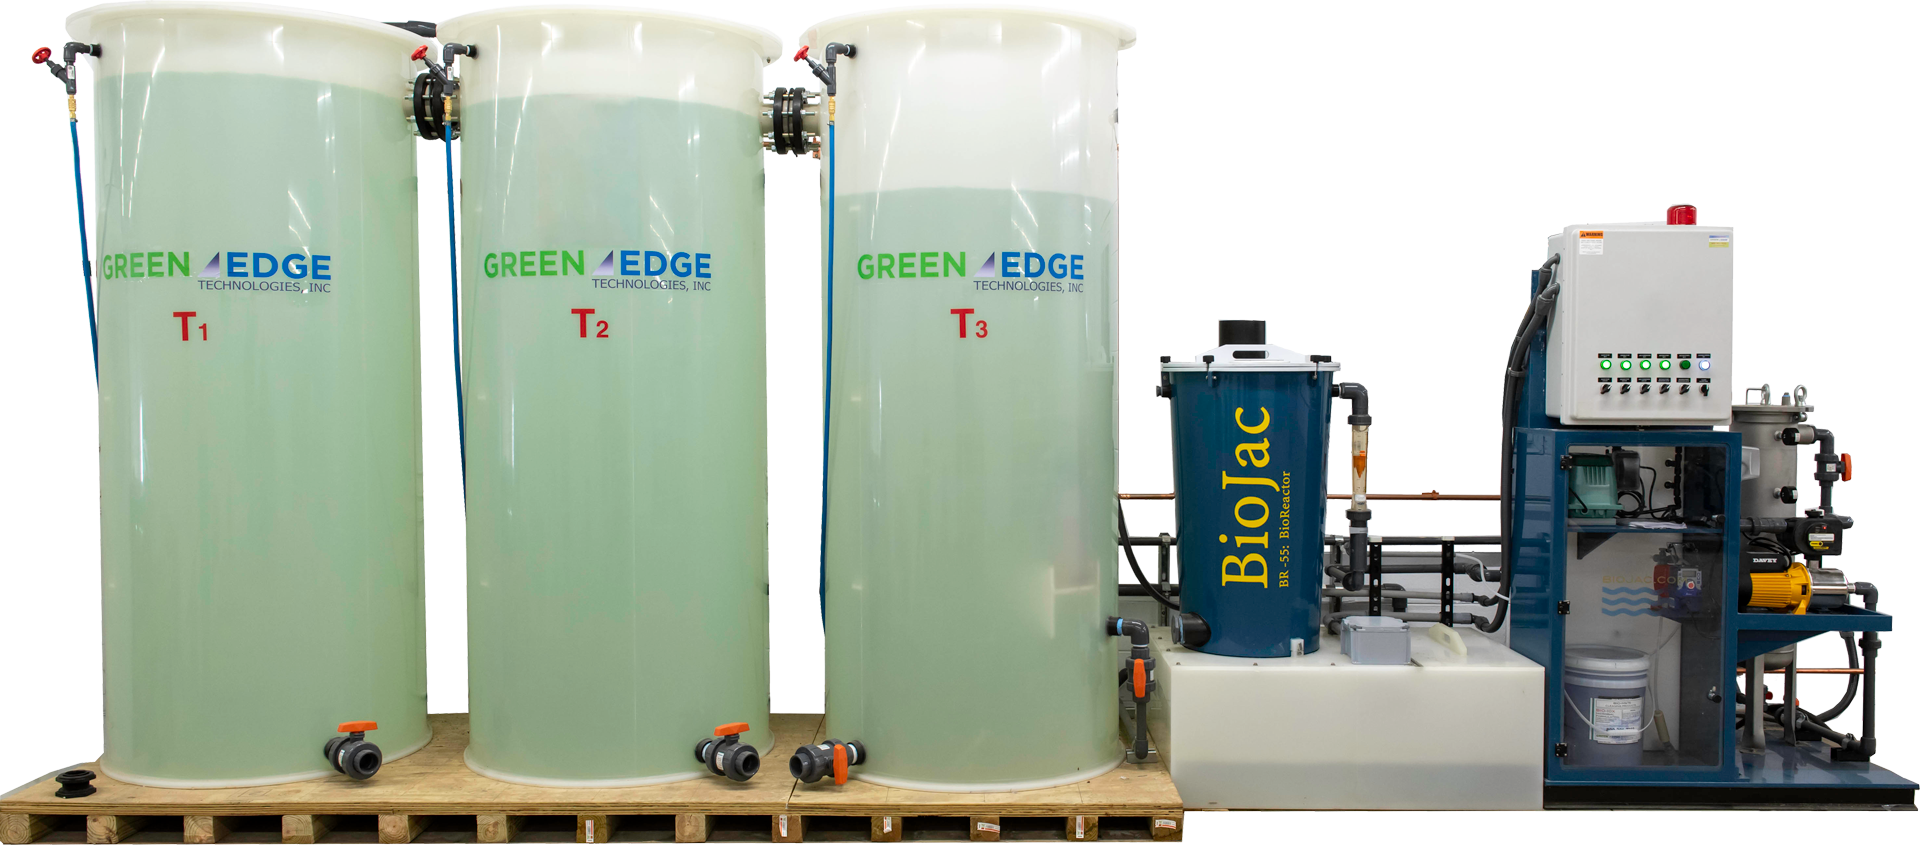 Wash bays can now reclaim water efficiently using the BioJac™ System by GreenEdge Technologies.